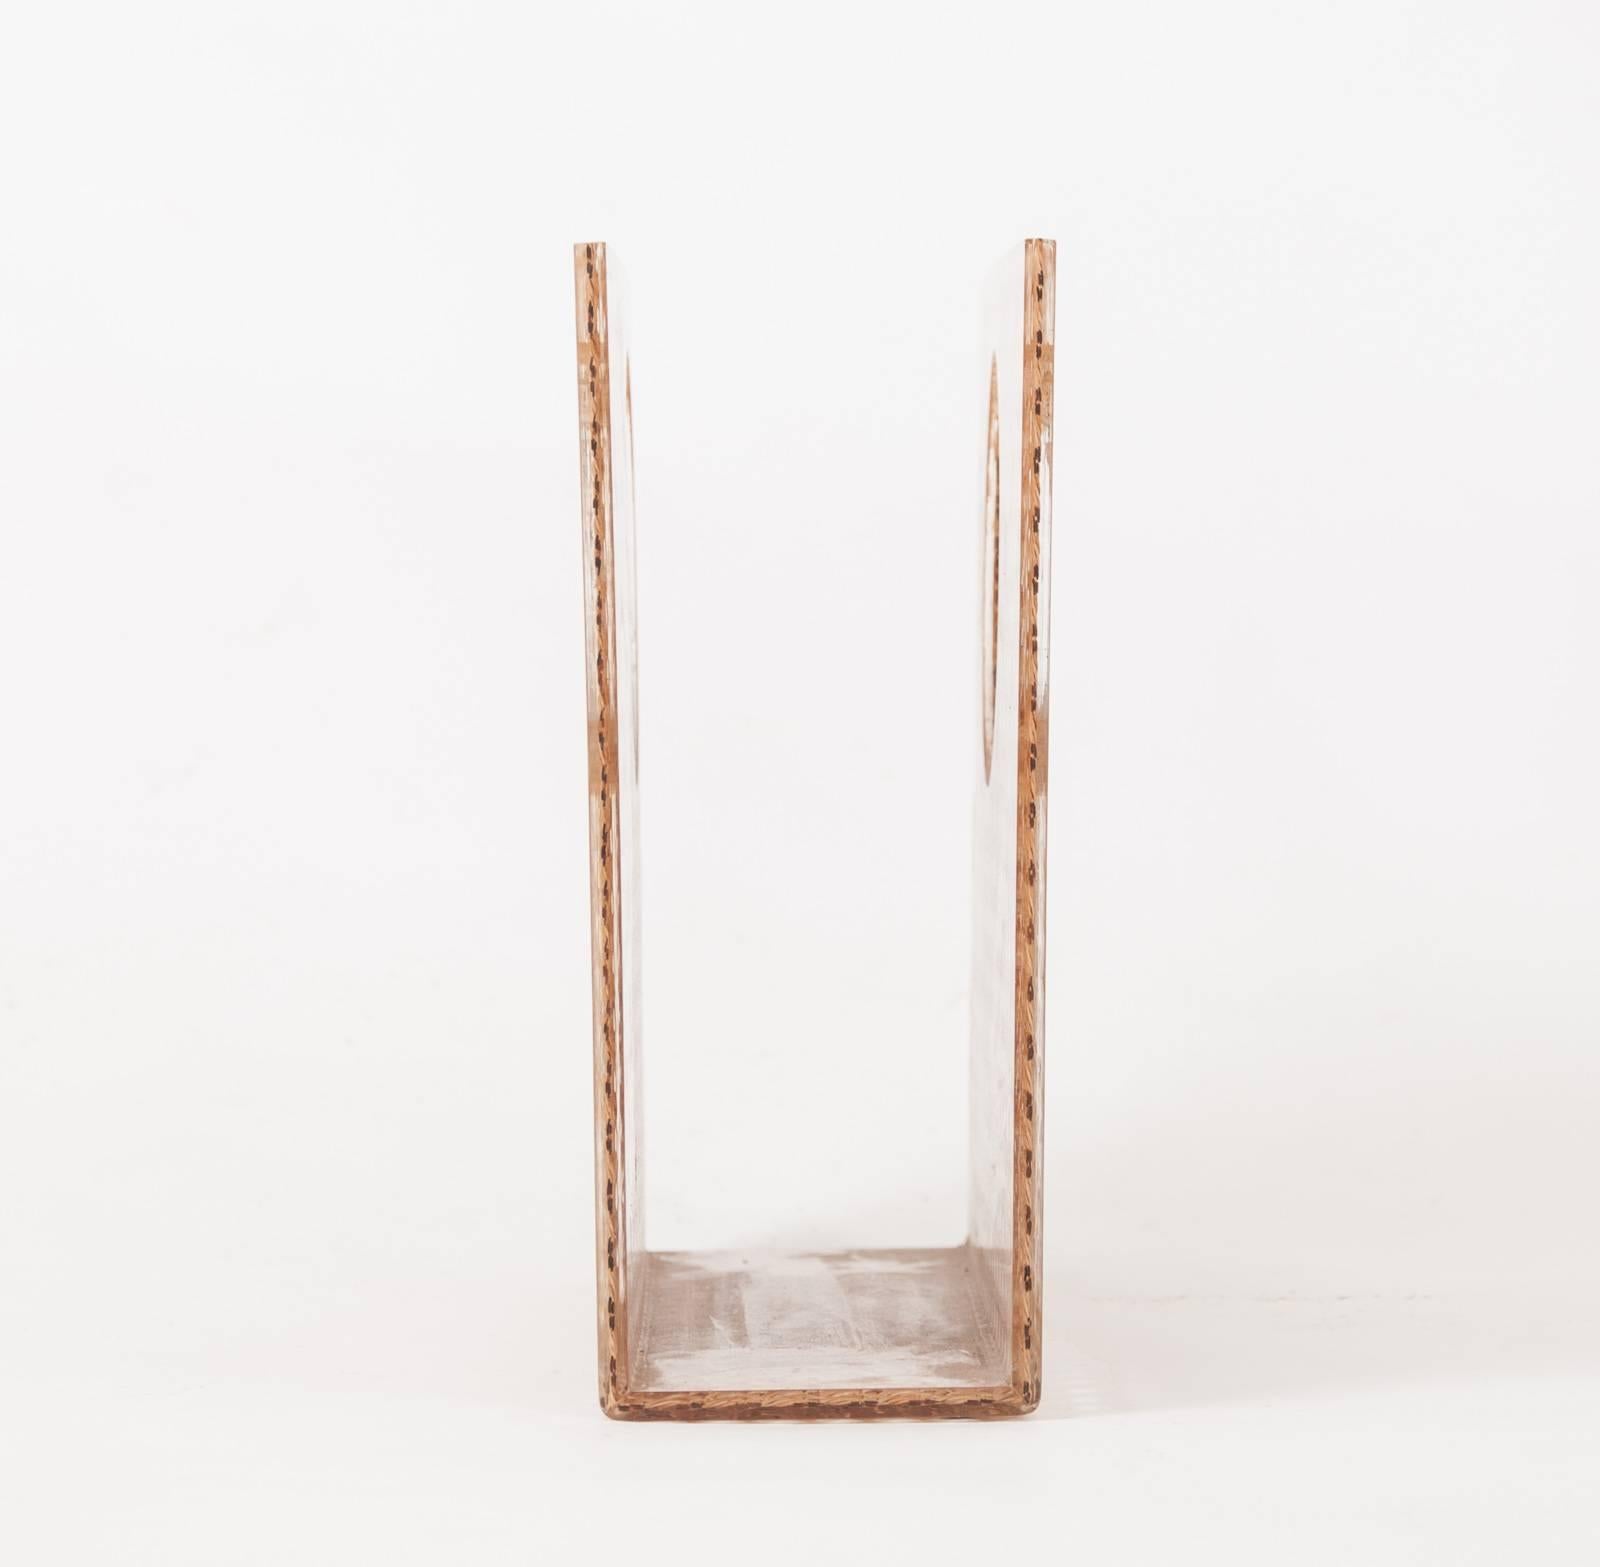 Late 20th Century Christian Dior Home Attributed Lucite and Cane Magazine Holder